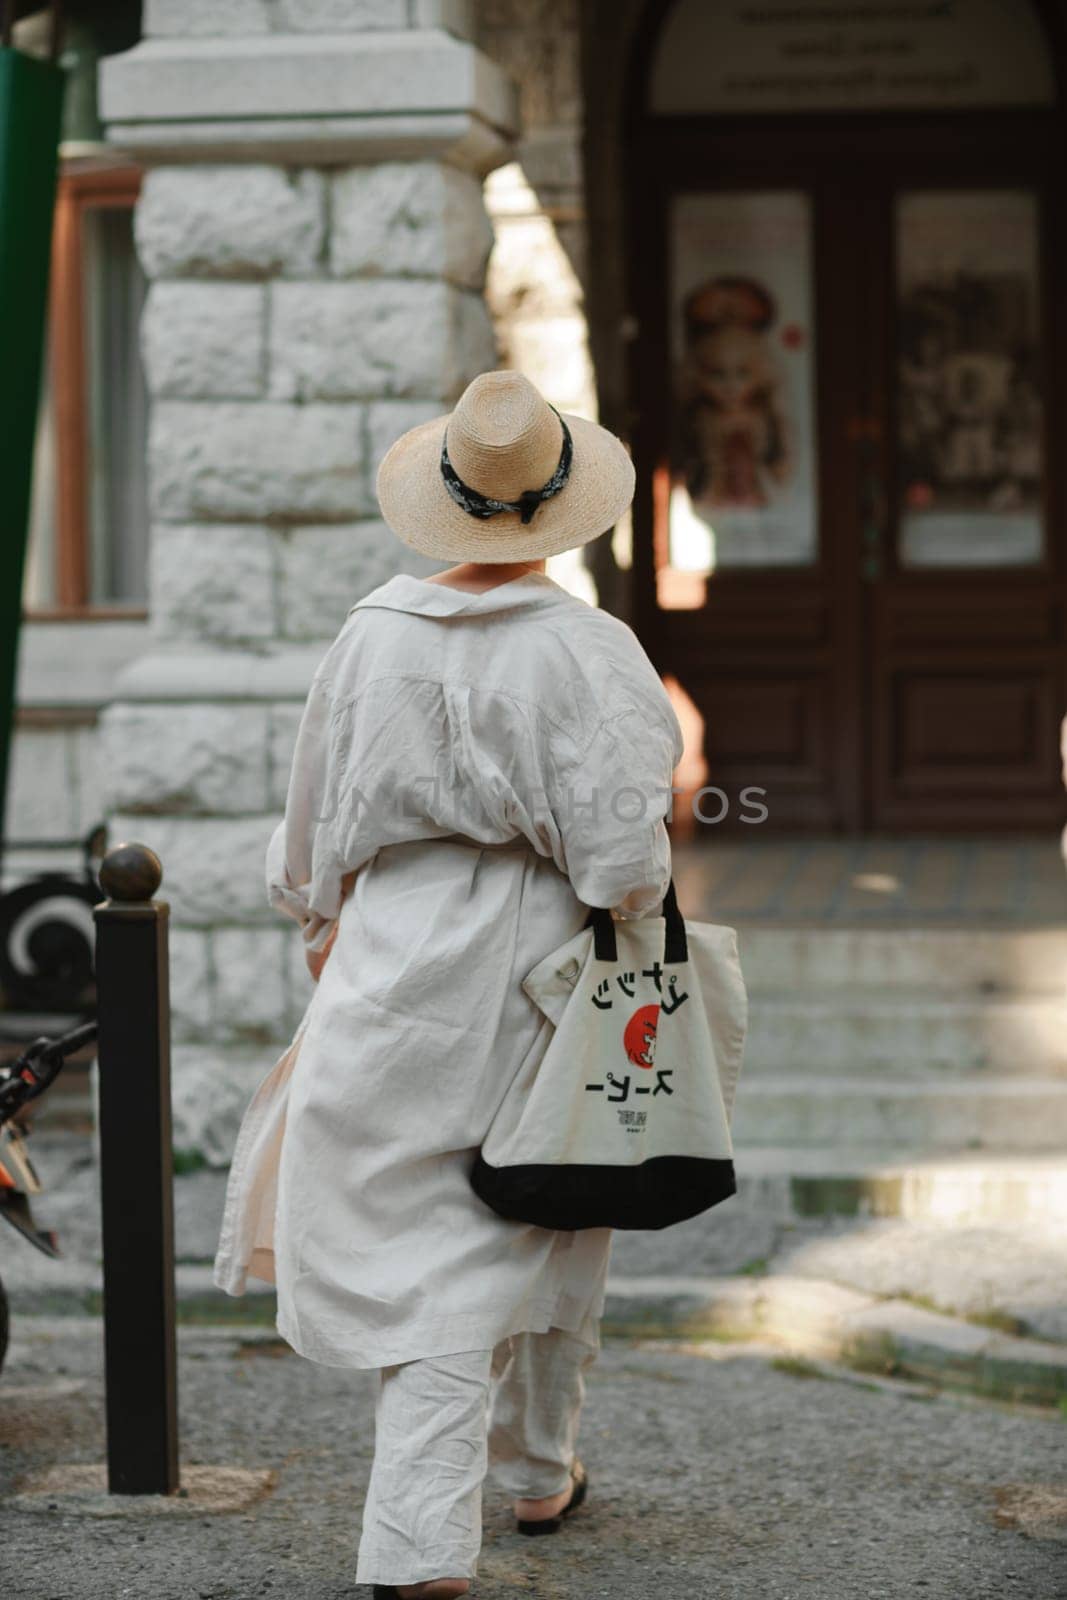 A woman in a hat in a white outfit with a bag walks around the Livadia Palace by Matiunina